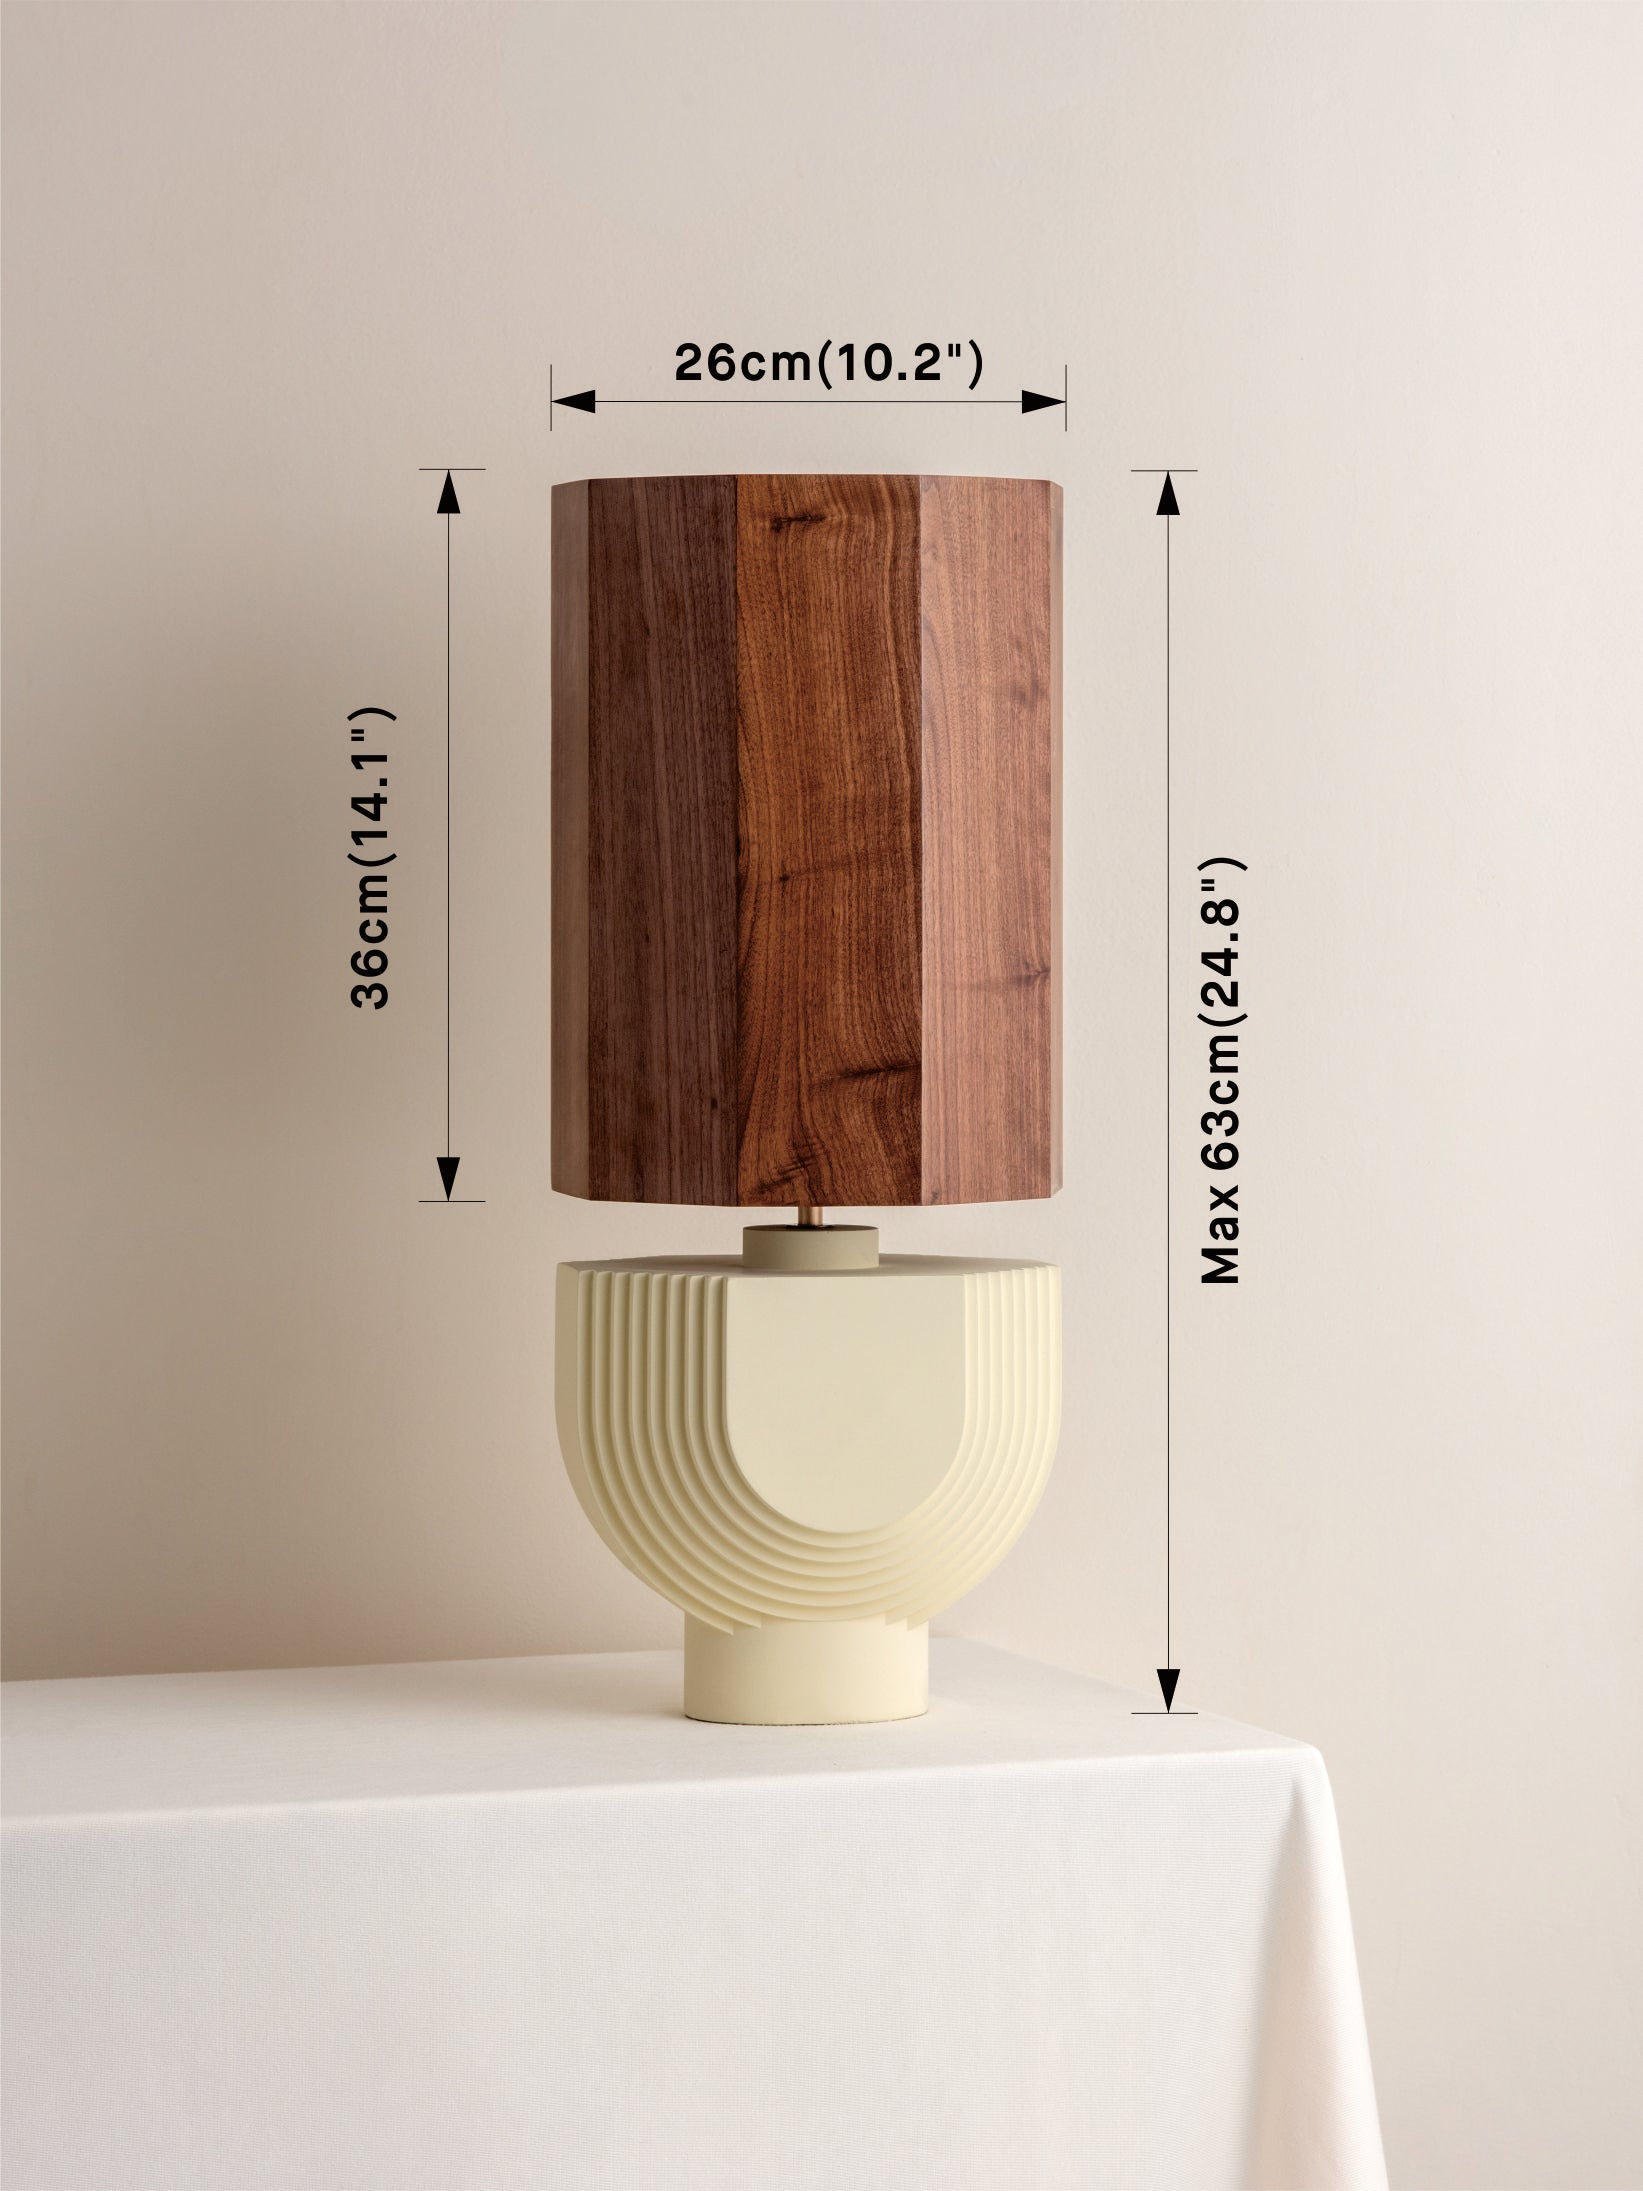 Editions concrete lamp with + walnut wood shade | Table Lamp | Lights & Lamps | UK | Modern Affordable Designer Lighting